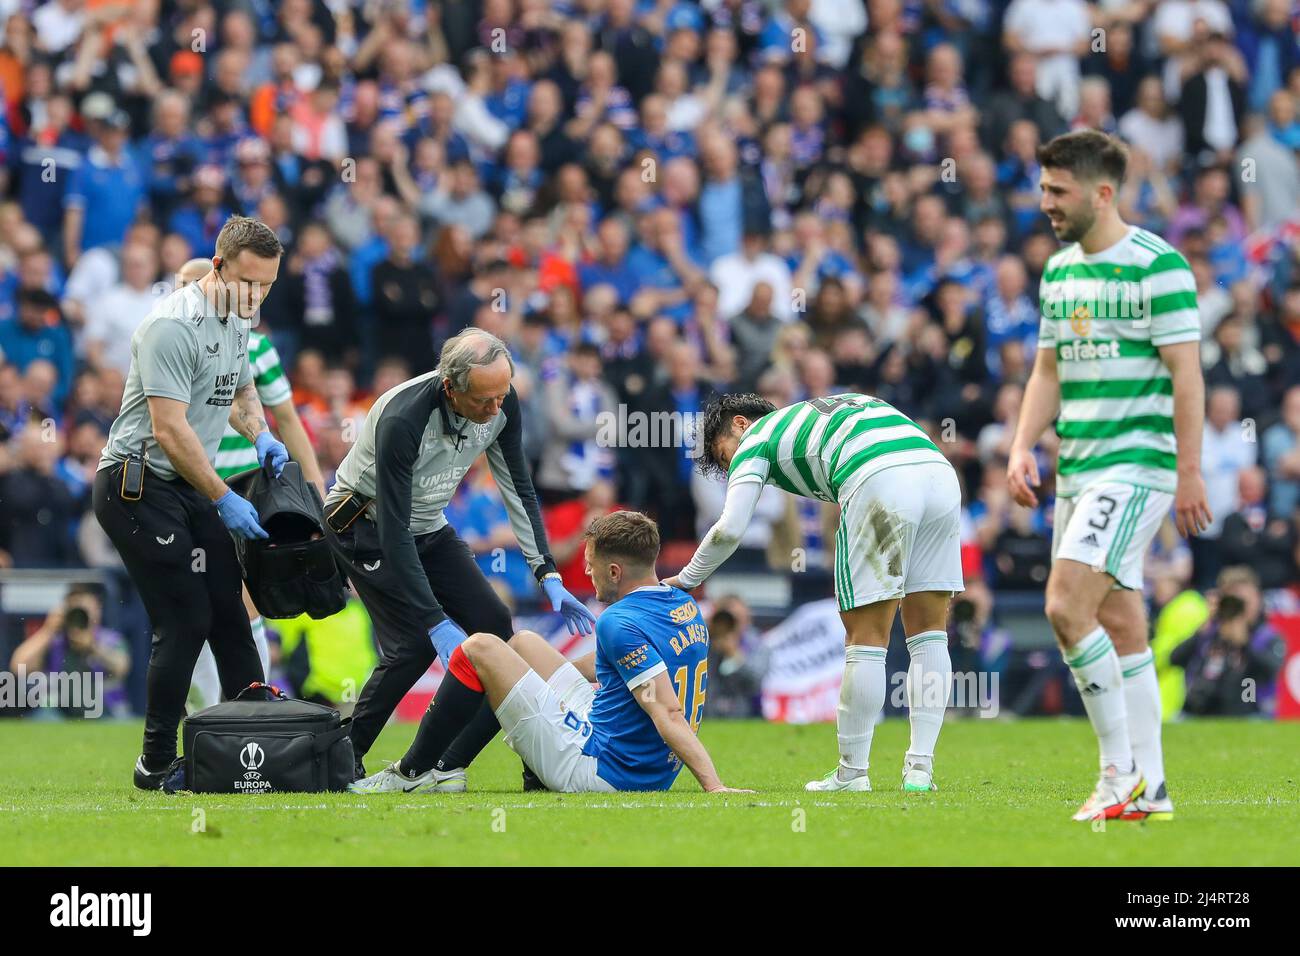 Glasgow, UK. 17th Apr, 2022. Celtic FC play Rangers FC in the Scottish Cup semi-final. The winner of this match goes forwards to play Heart of Midlothian in the final. Credit: Findlay/Alamy Live News Stock Photo